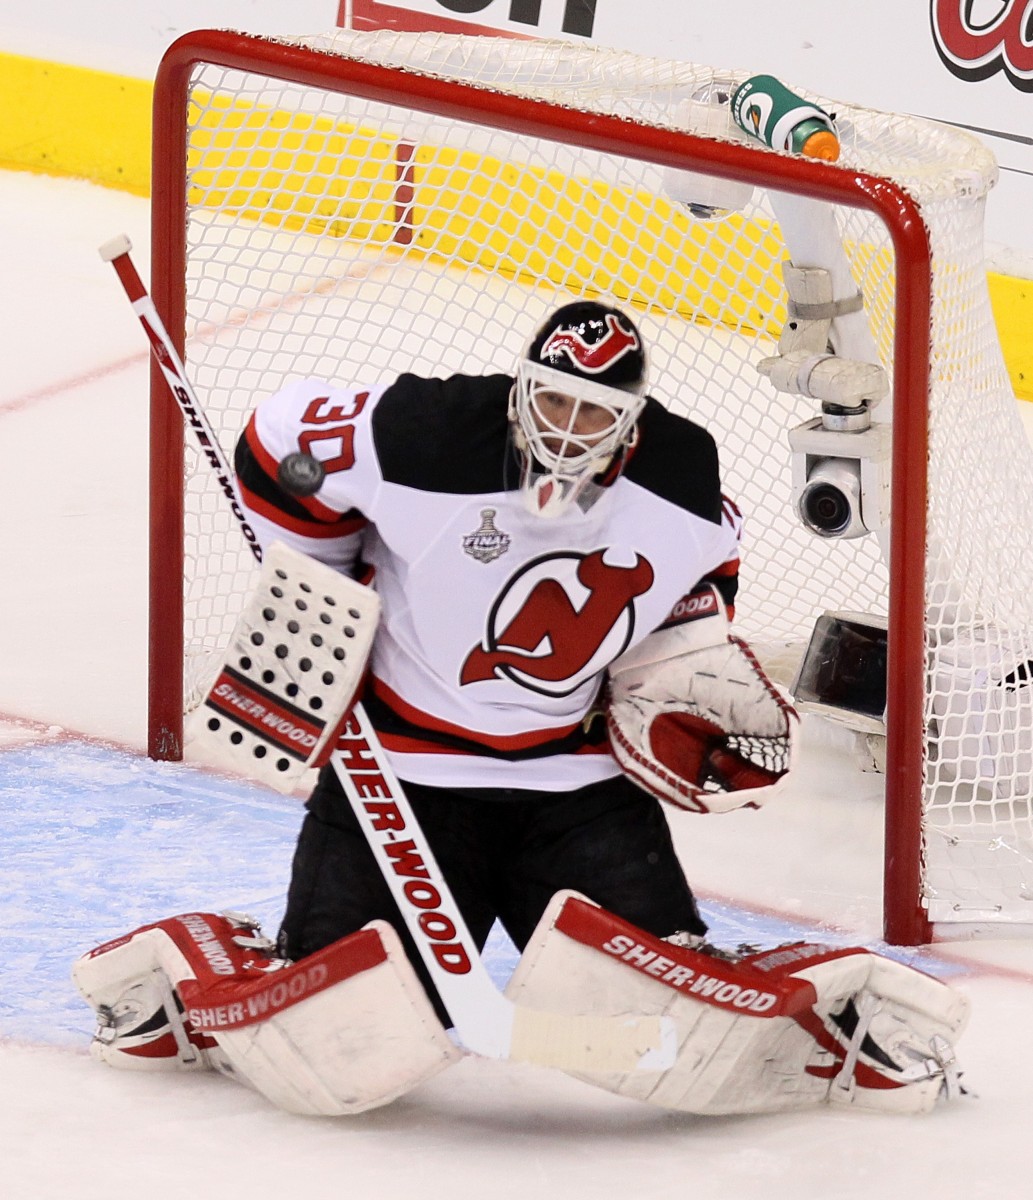 The New Jersey Devils beat the Los Angeles Kings 3-1 in Game 4 on Wednesday night to prevent the Kings from winning their first Stanley Cup. New Jersey goaltender Martin Brodeur had a stellar game and Adam Henrique scored the game-winning goal late in the third period. (Jeff Gross/Getty Images)